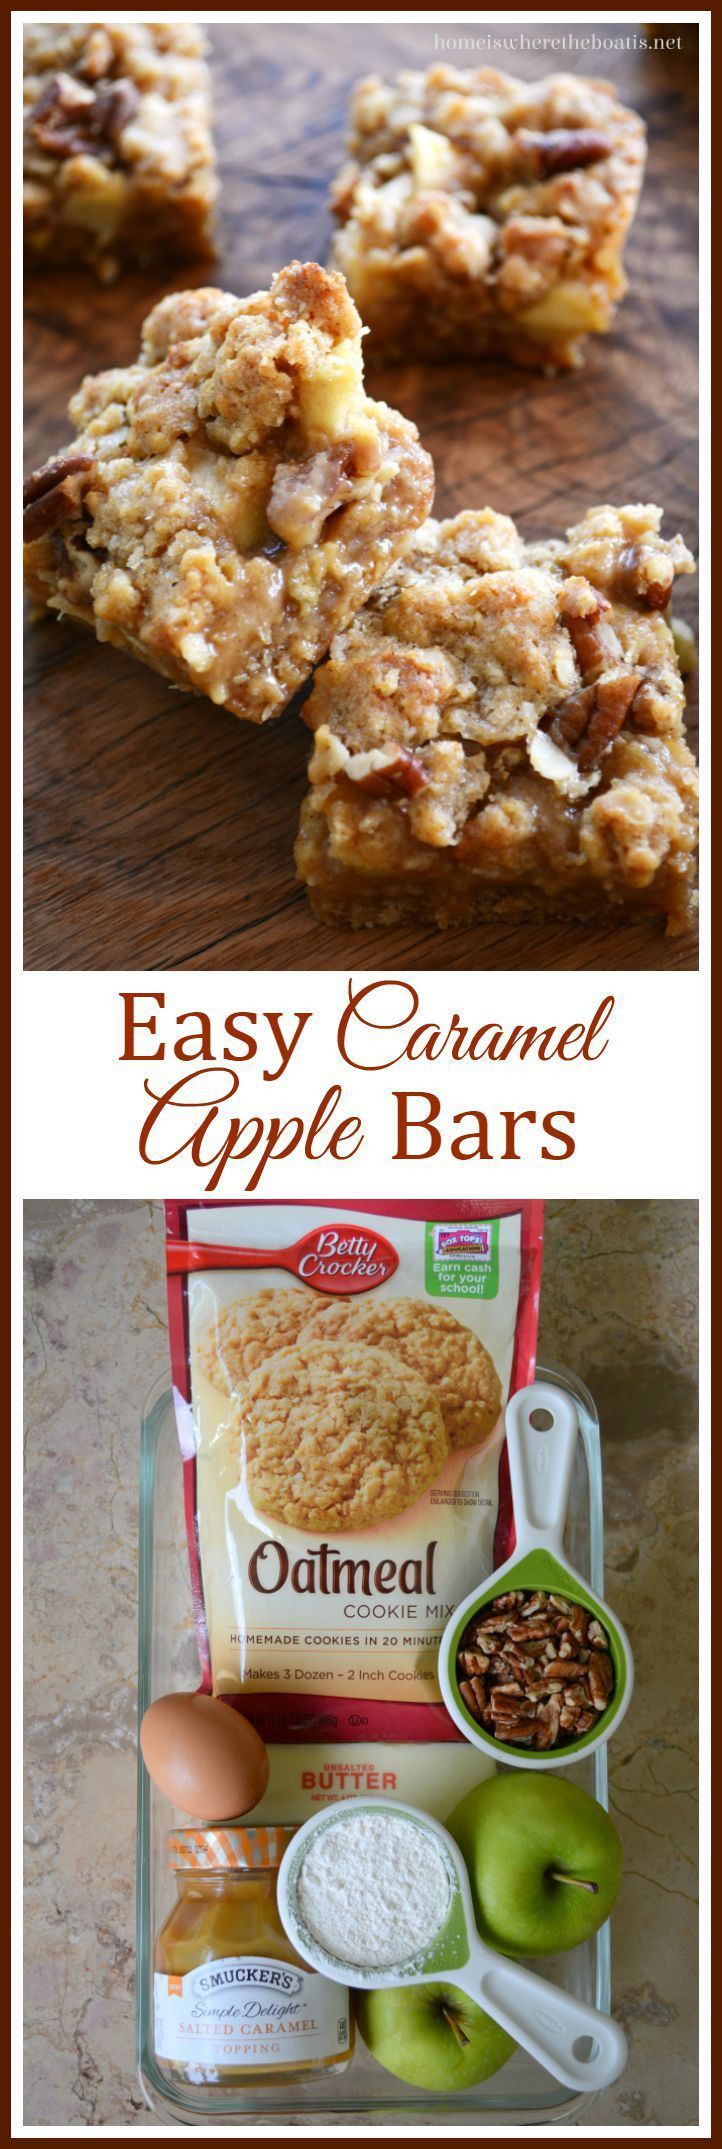 Easy Fall Desserts For A Crowd
 Easy Caramel Apple Bars An easy and crowd pleasing recipe